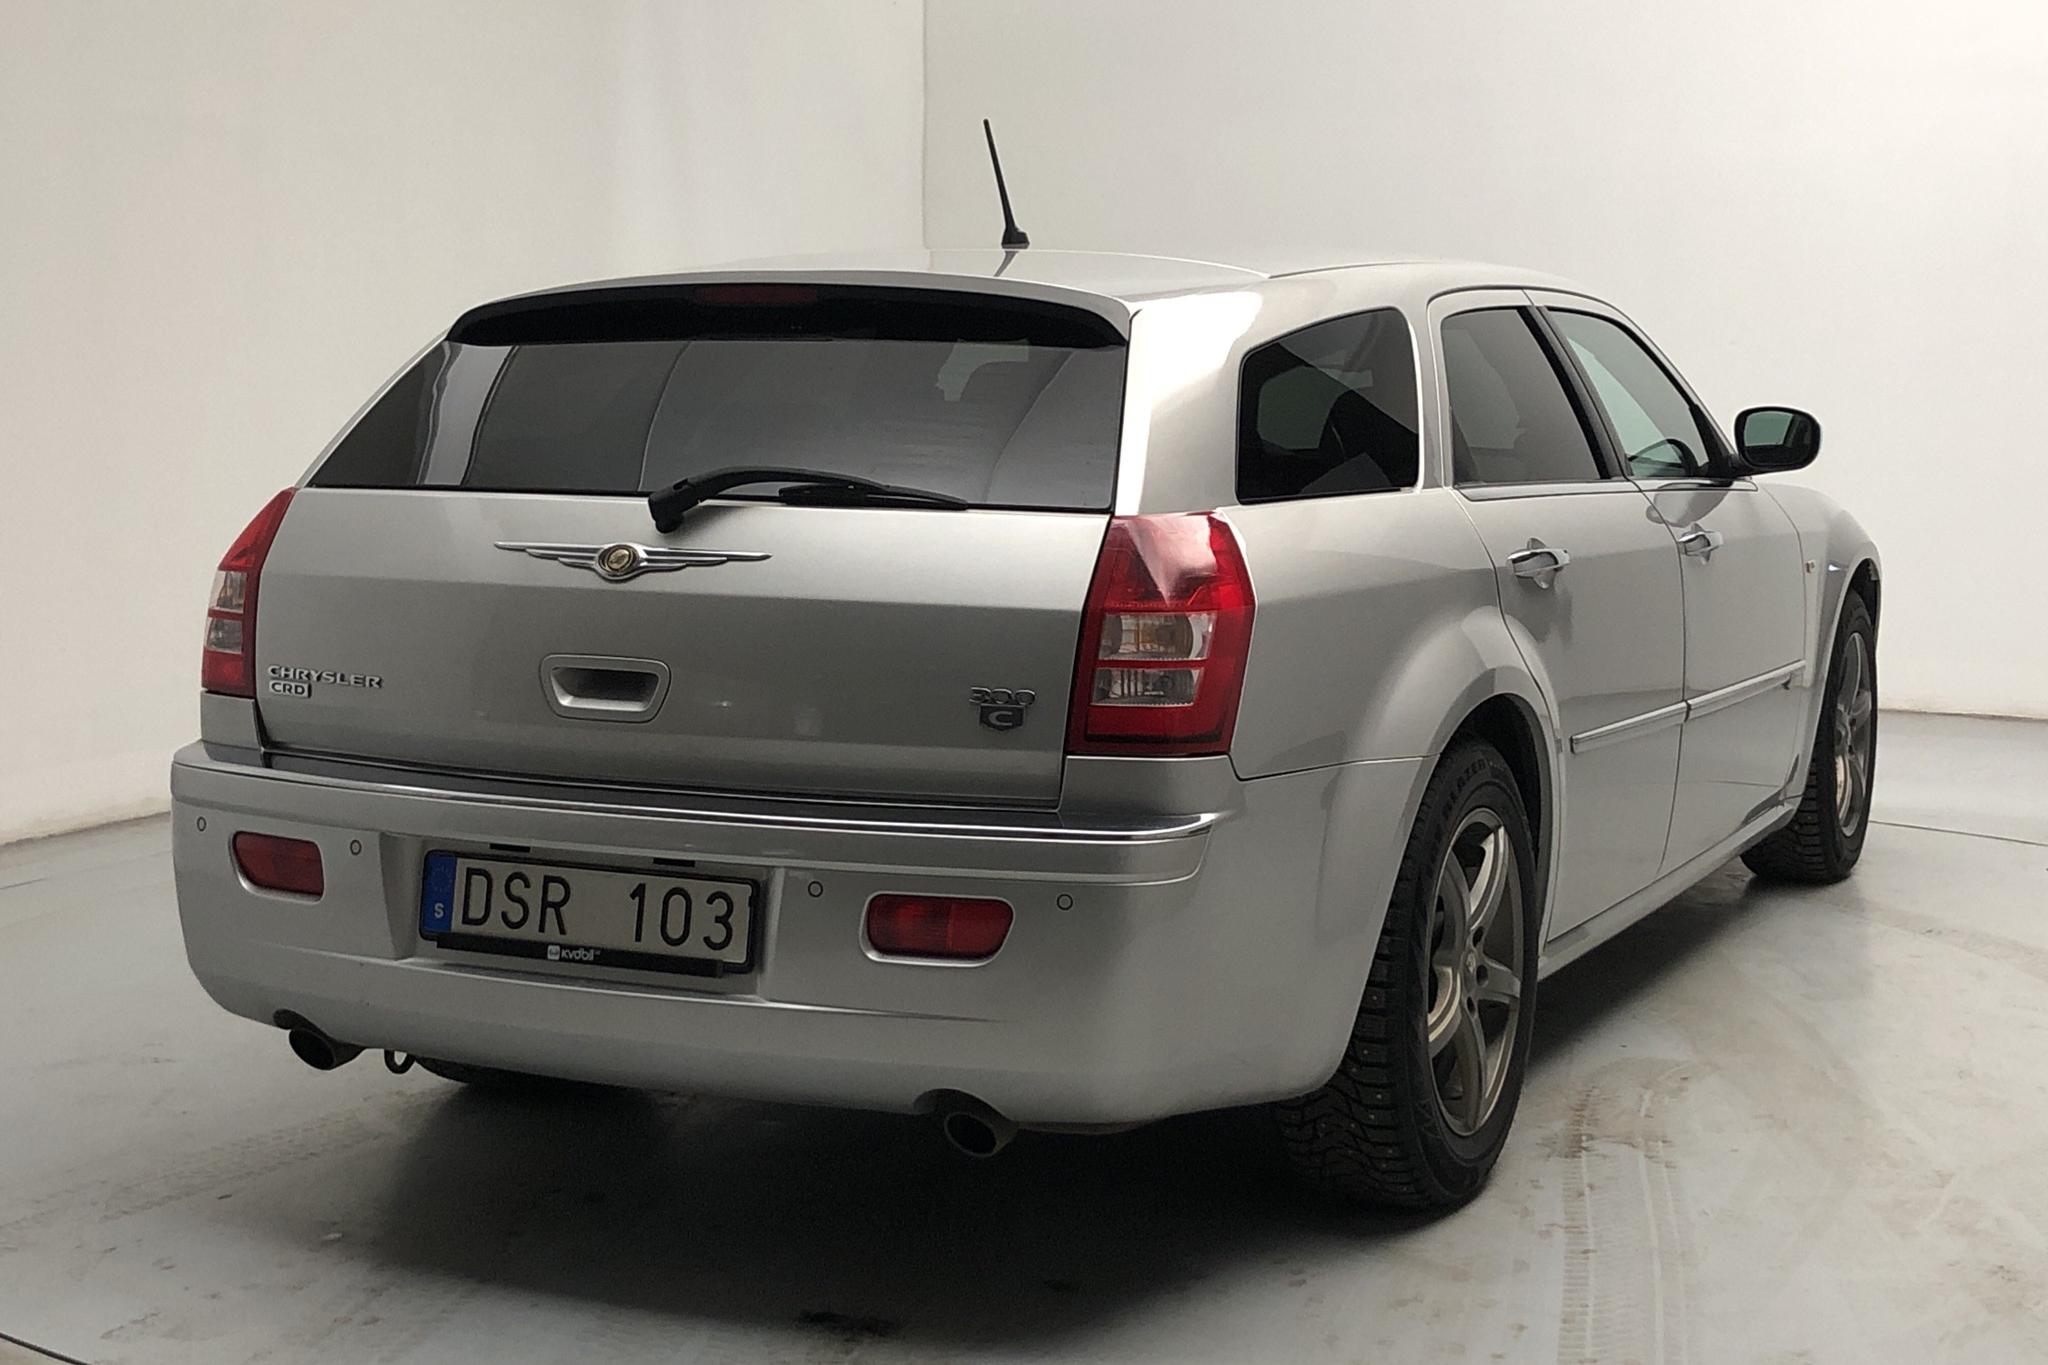 Chrysler 300C 3.0 CRD Touring (218hk) - 167 130 km - Automatic - silver - 2008